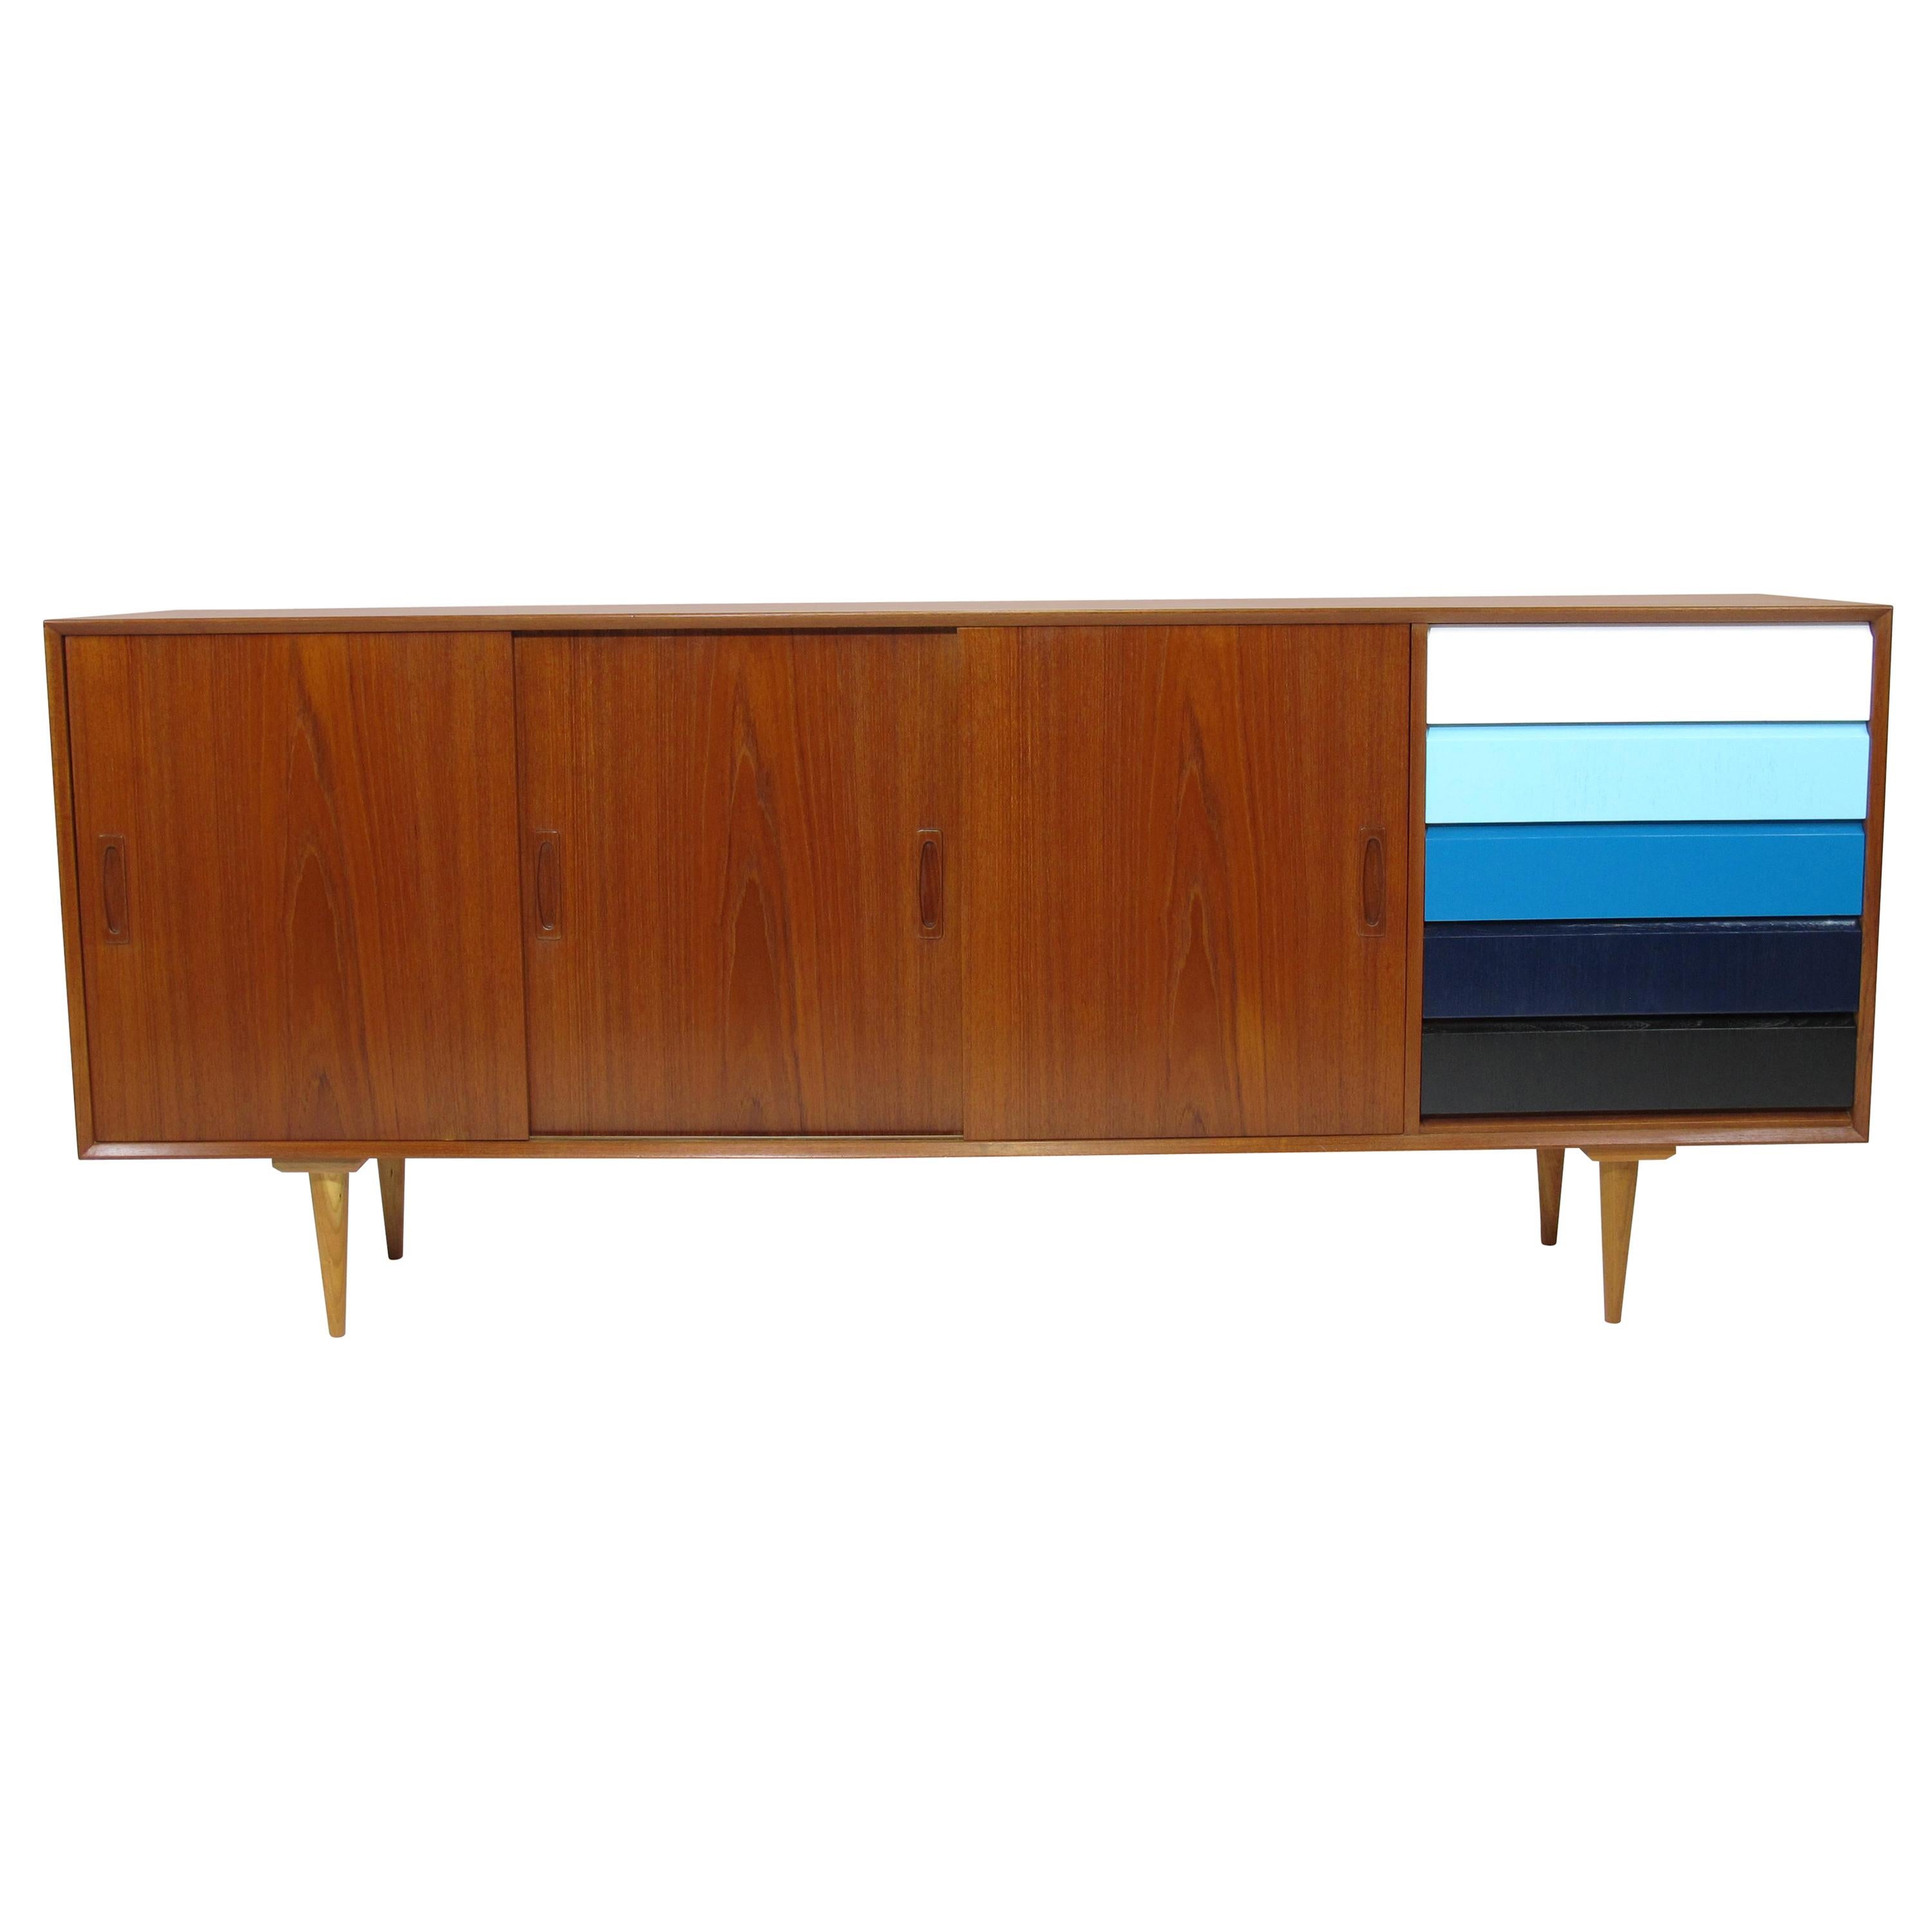 Teak Credenza with Sliding Doors and Color Blocked Drawers